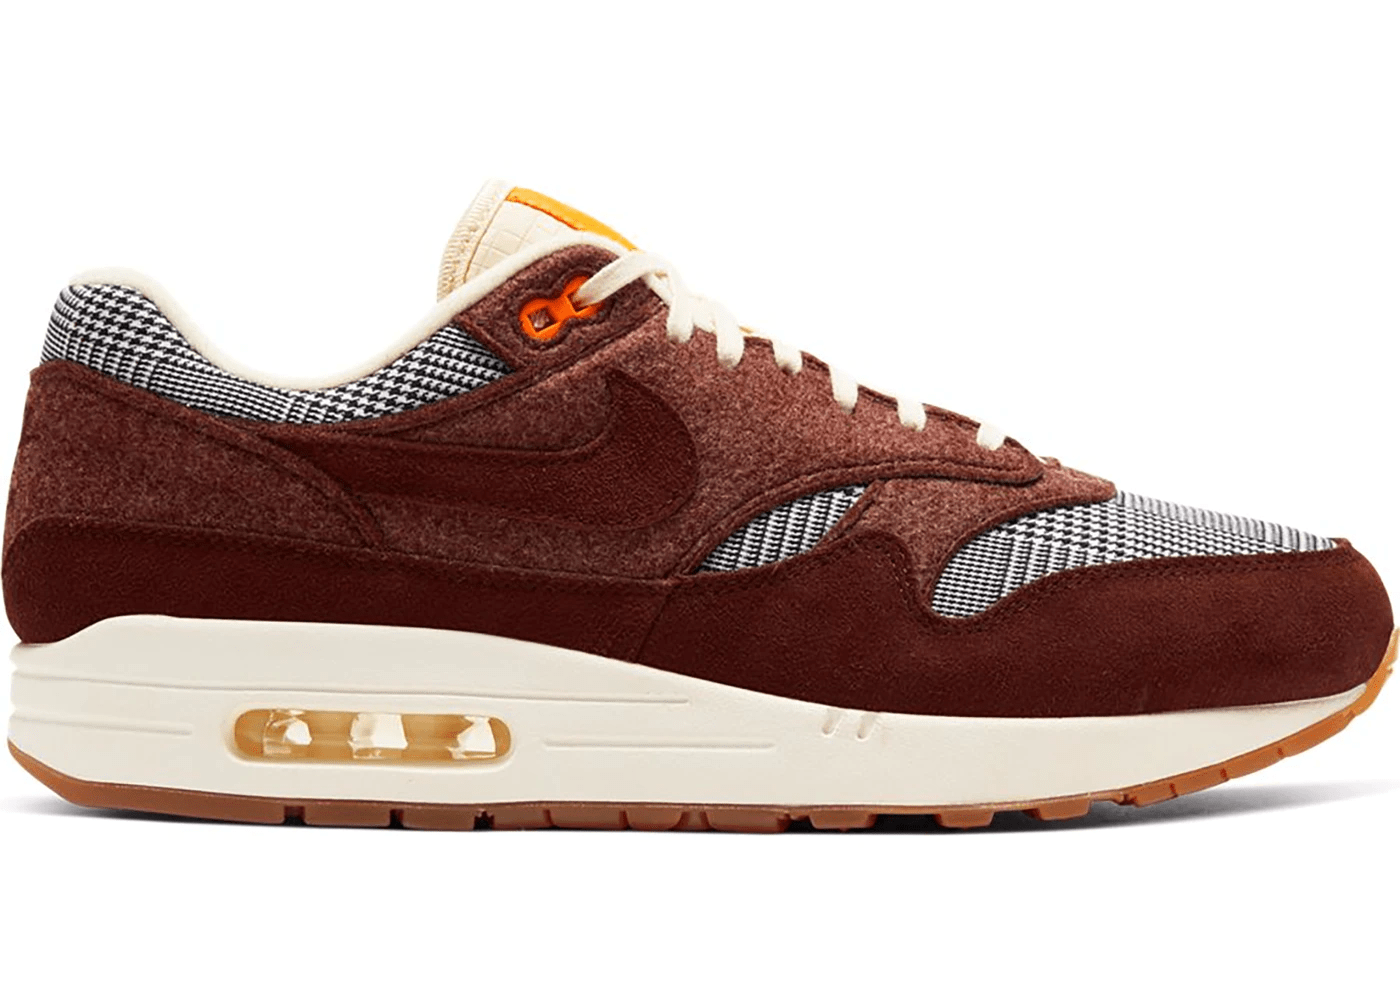 Nike Air Max 1 Houndstooth Bronze Eclipse